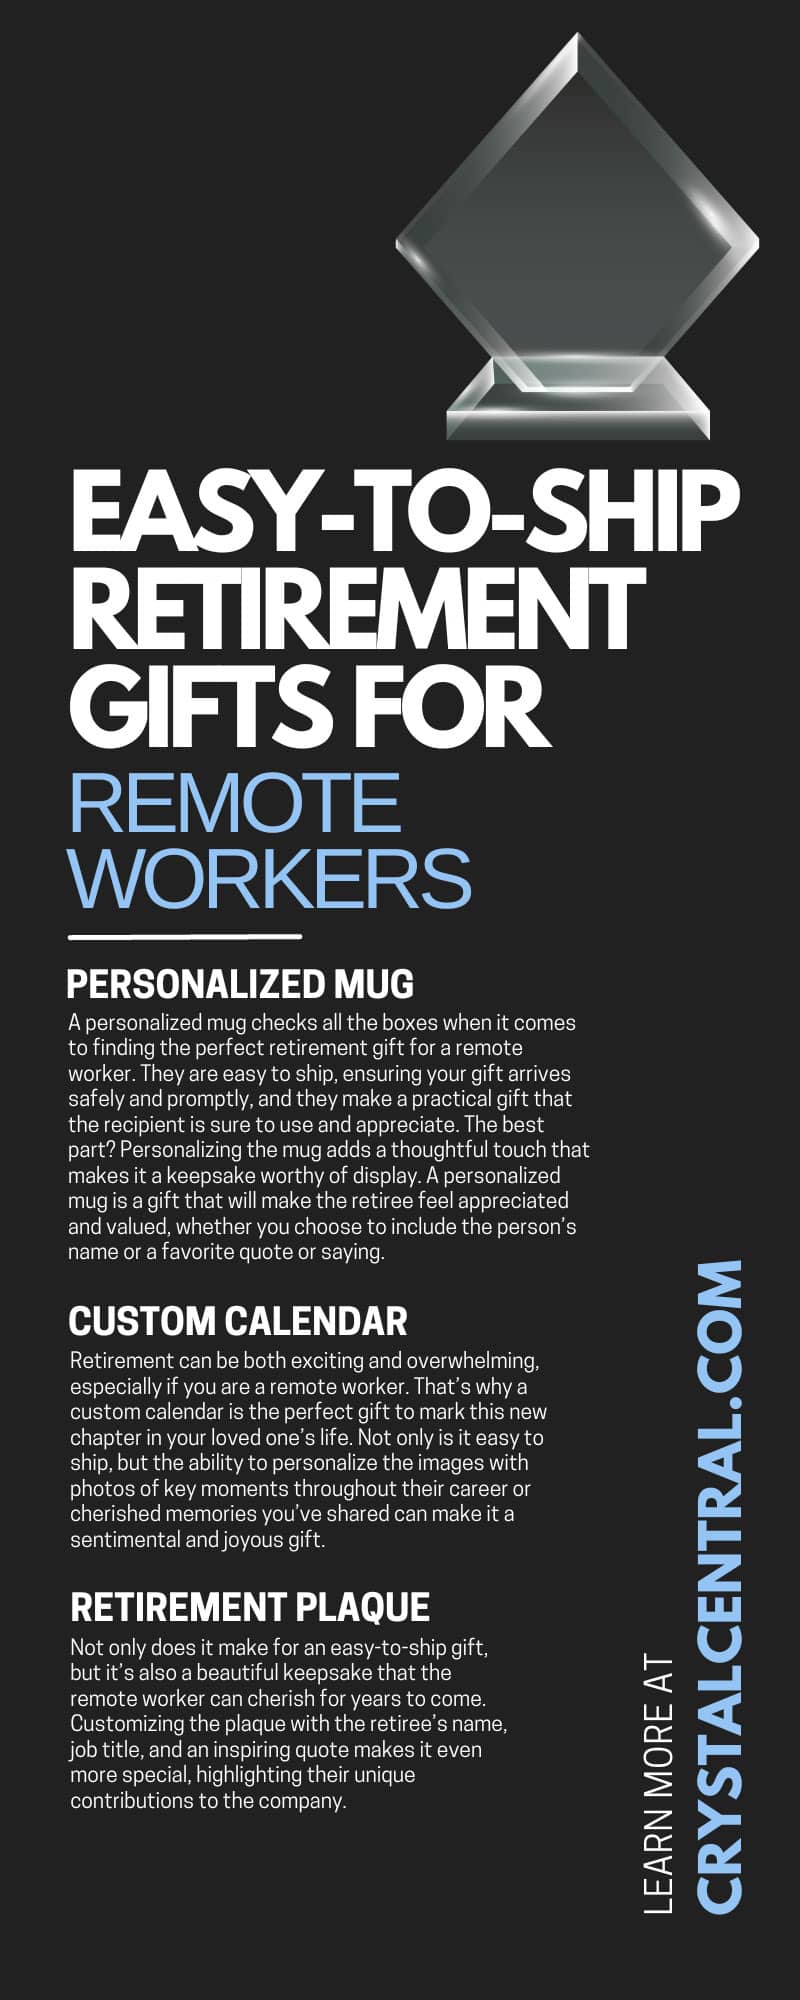 7 Easy-To-Ship Retirement Gifts for Remote Workers